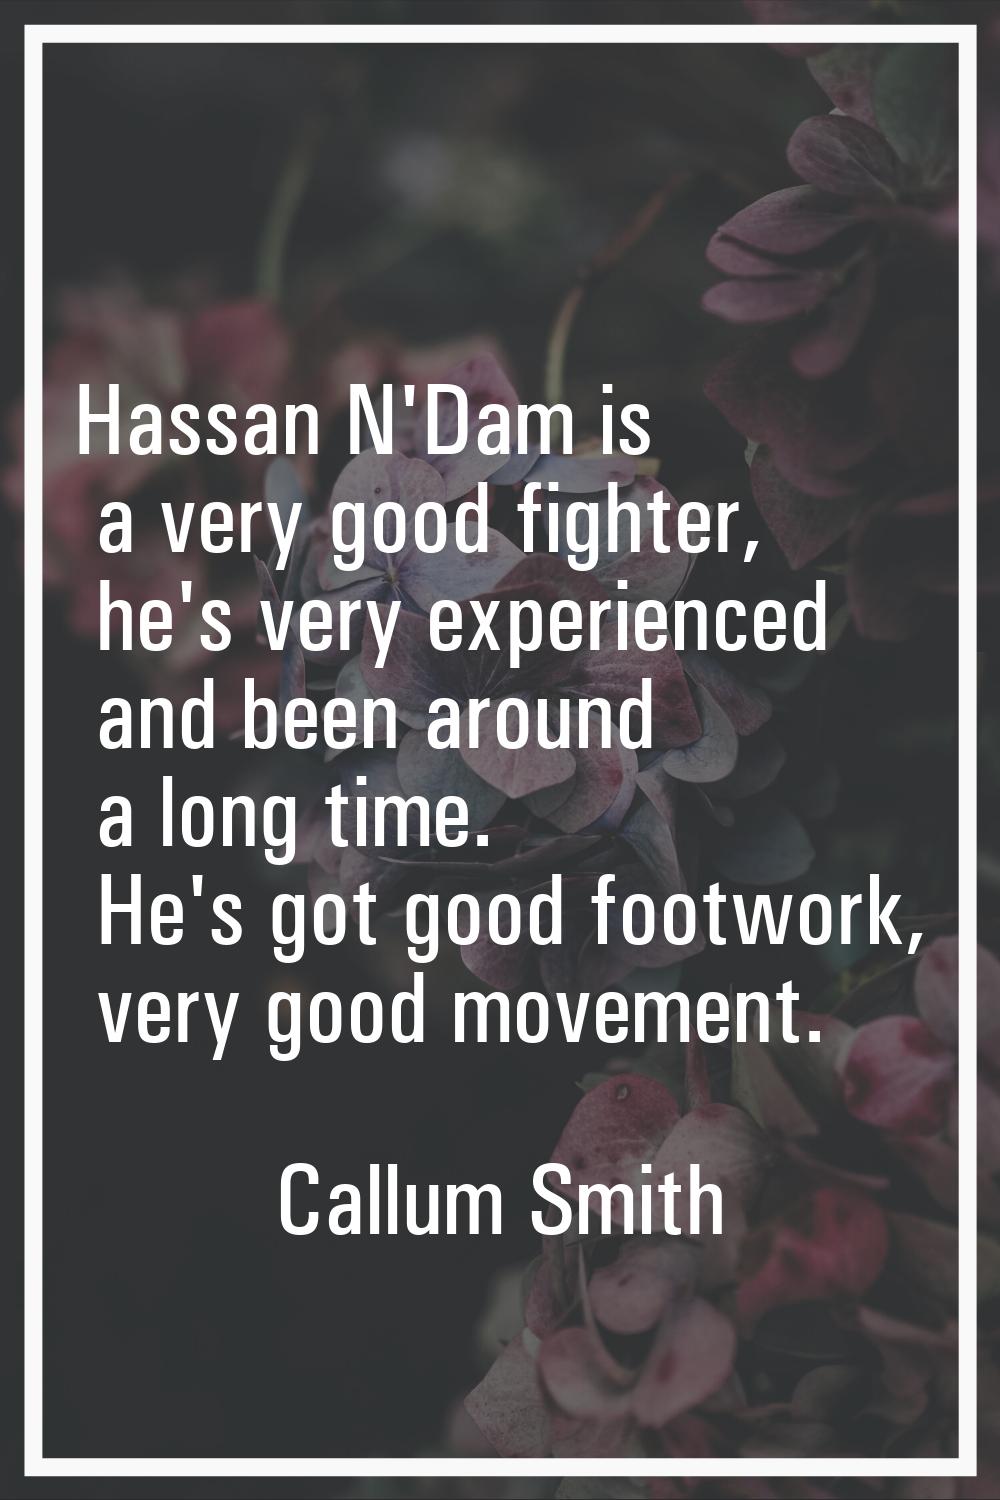 Hassan N'Dam is a very good fighter, he's very experienced and been around a long time. He's got go